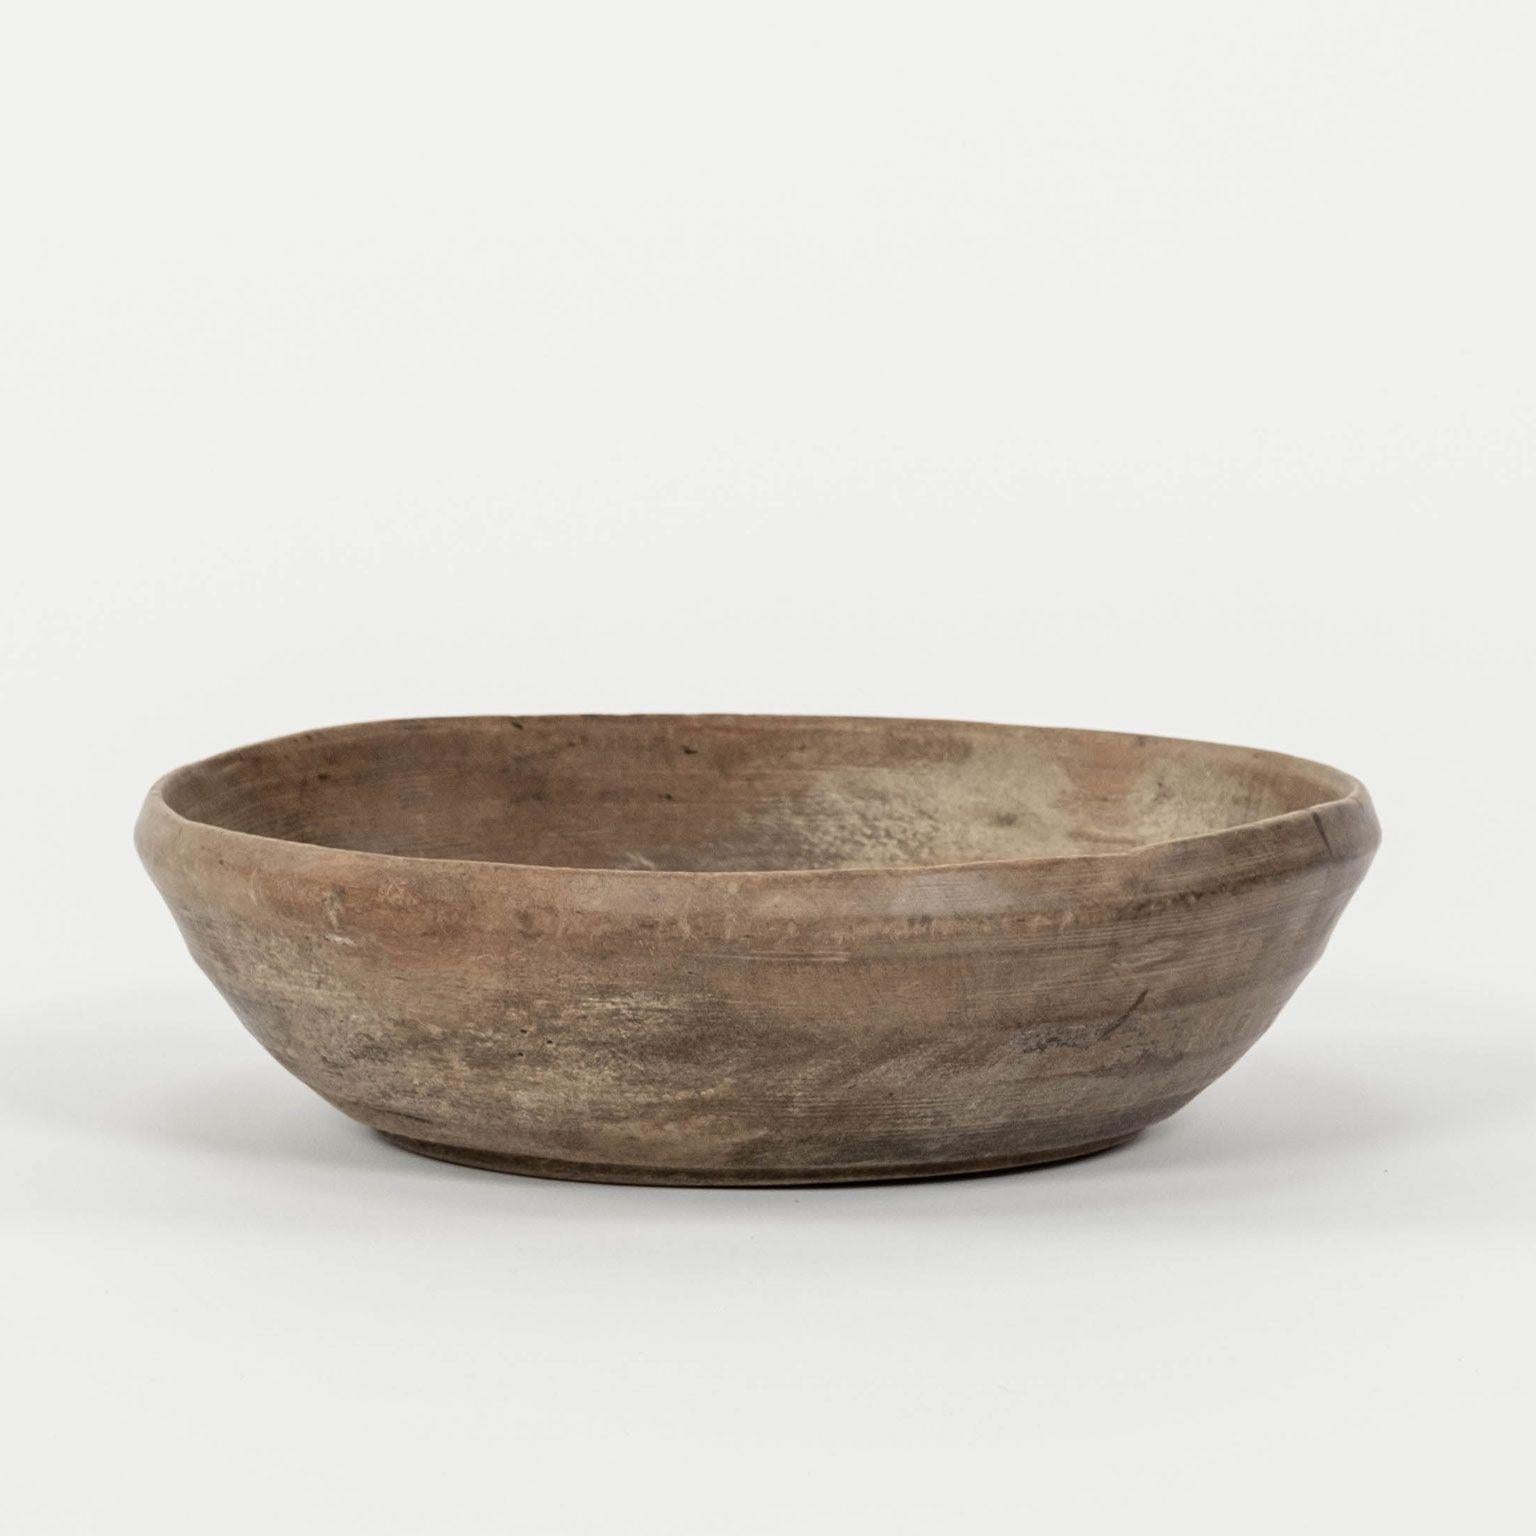 Rustic Swedish ribbed walnut dough bowl dating to the mid-19th century. Desirable mid-brown color finish. Turned subtle footed base. Decorated with ribbing and incised lines from the turning lathe. Good weight and size.

Note: Due to regional